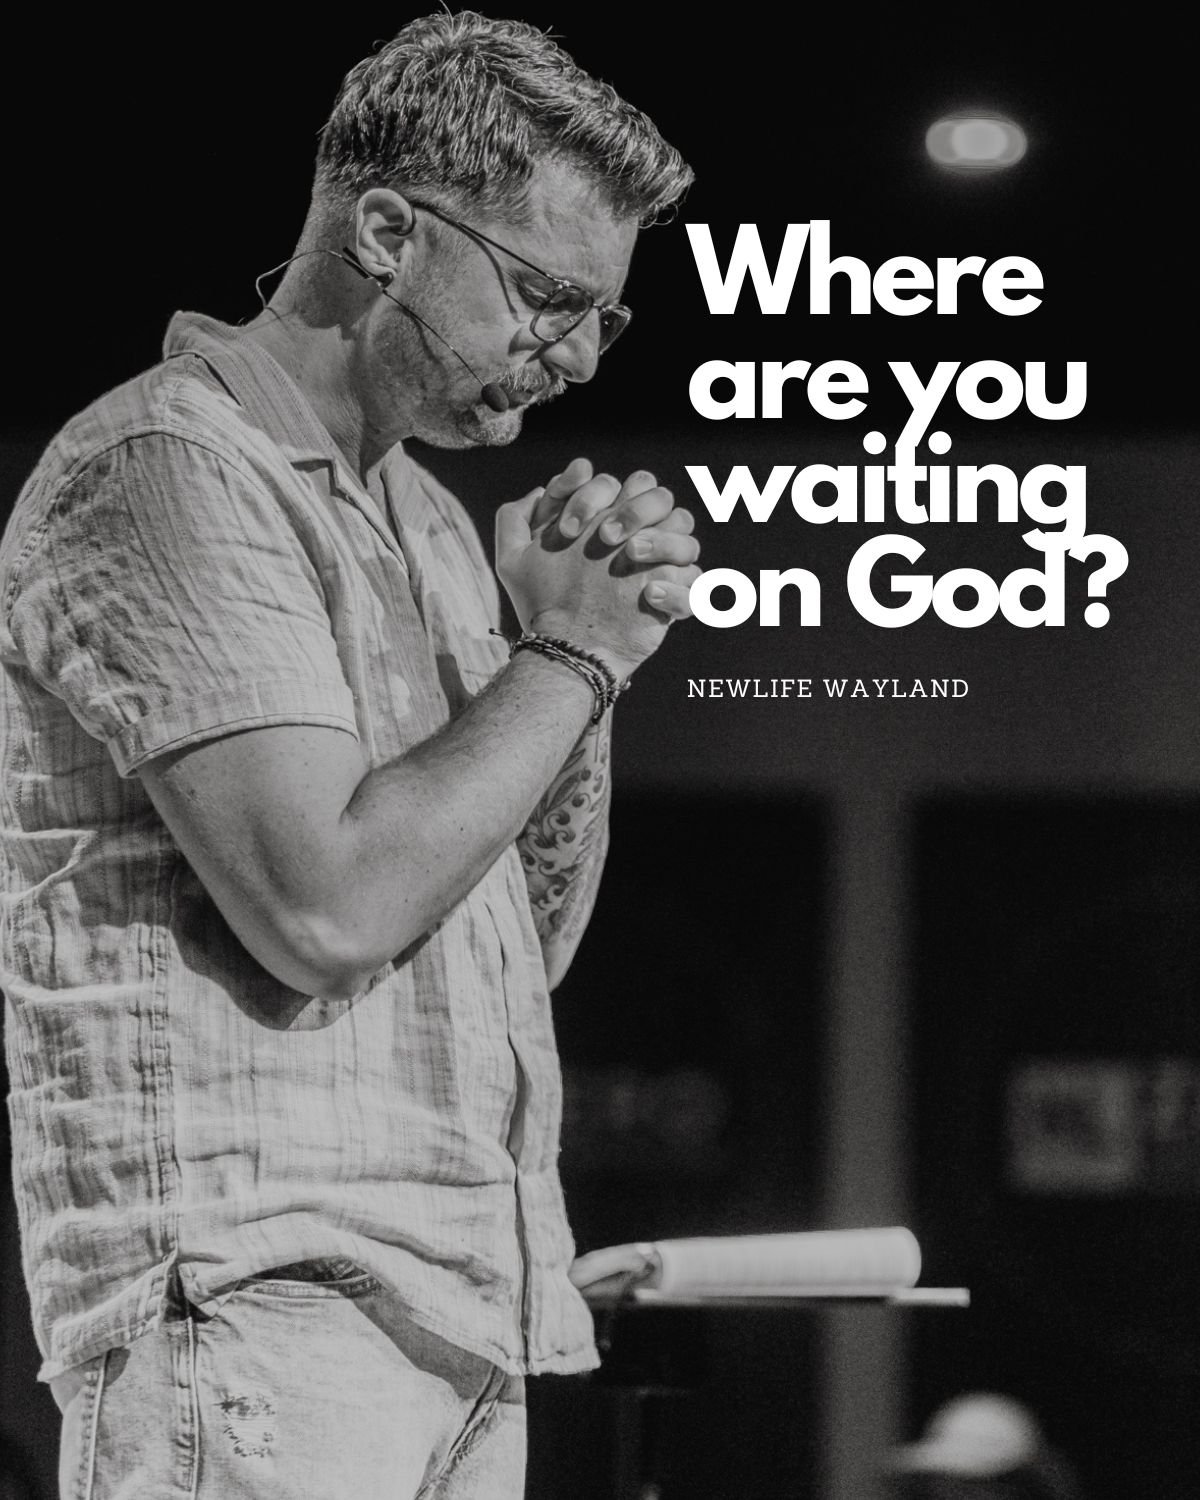 Where are you waiting on God? 

Missed the message yesterday or would like to listen again? Stream at: https://open.spotify.com/episode/06E67RZHrJqjUc8KXEVpdc?si=ot4JZInjRo-VAEvaV9svzg